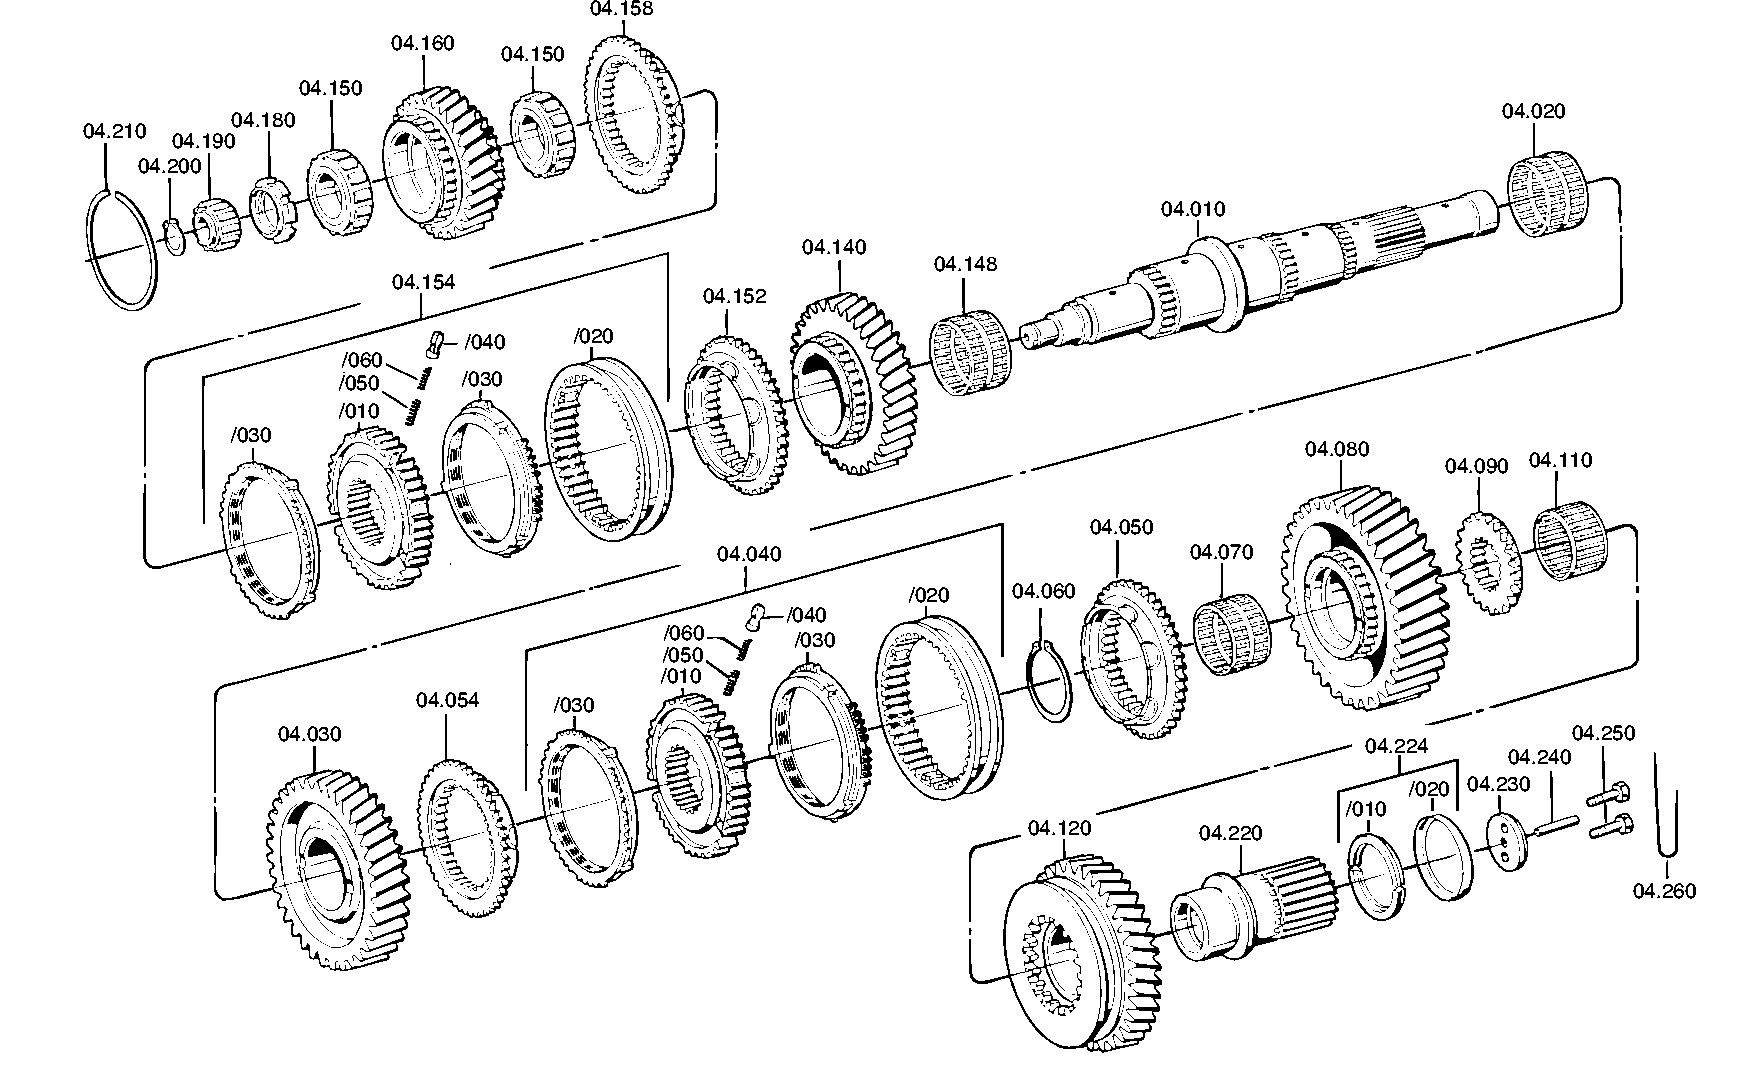 drawing for SKF 26-1271A - NEEDLE CAGE (figure 3)